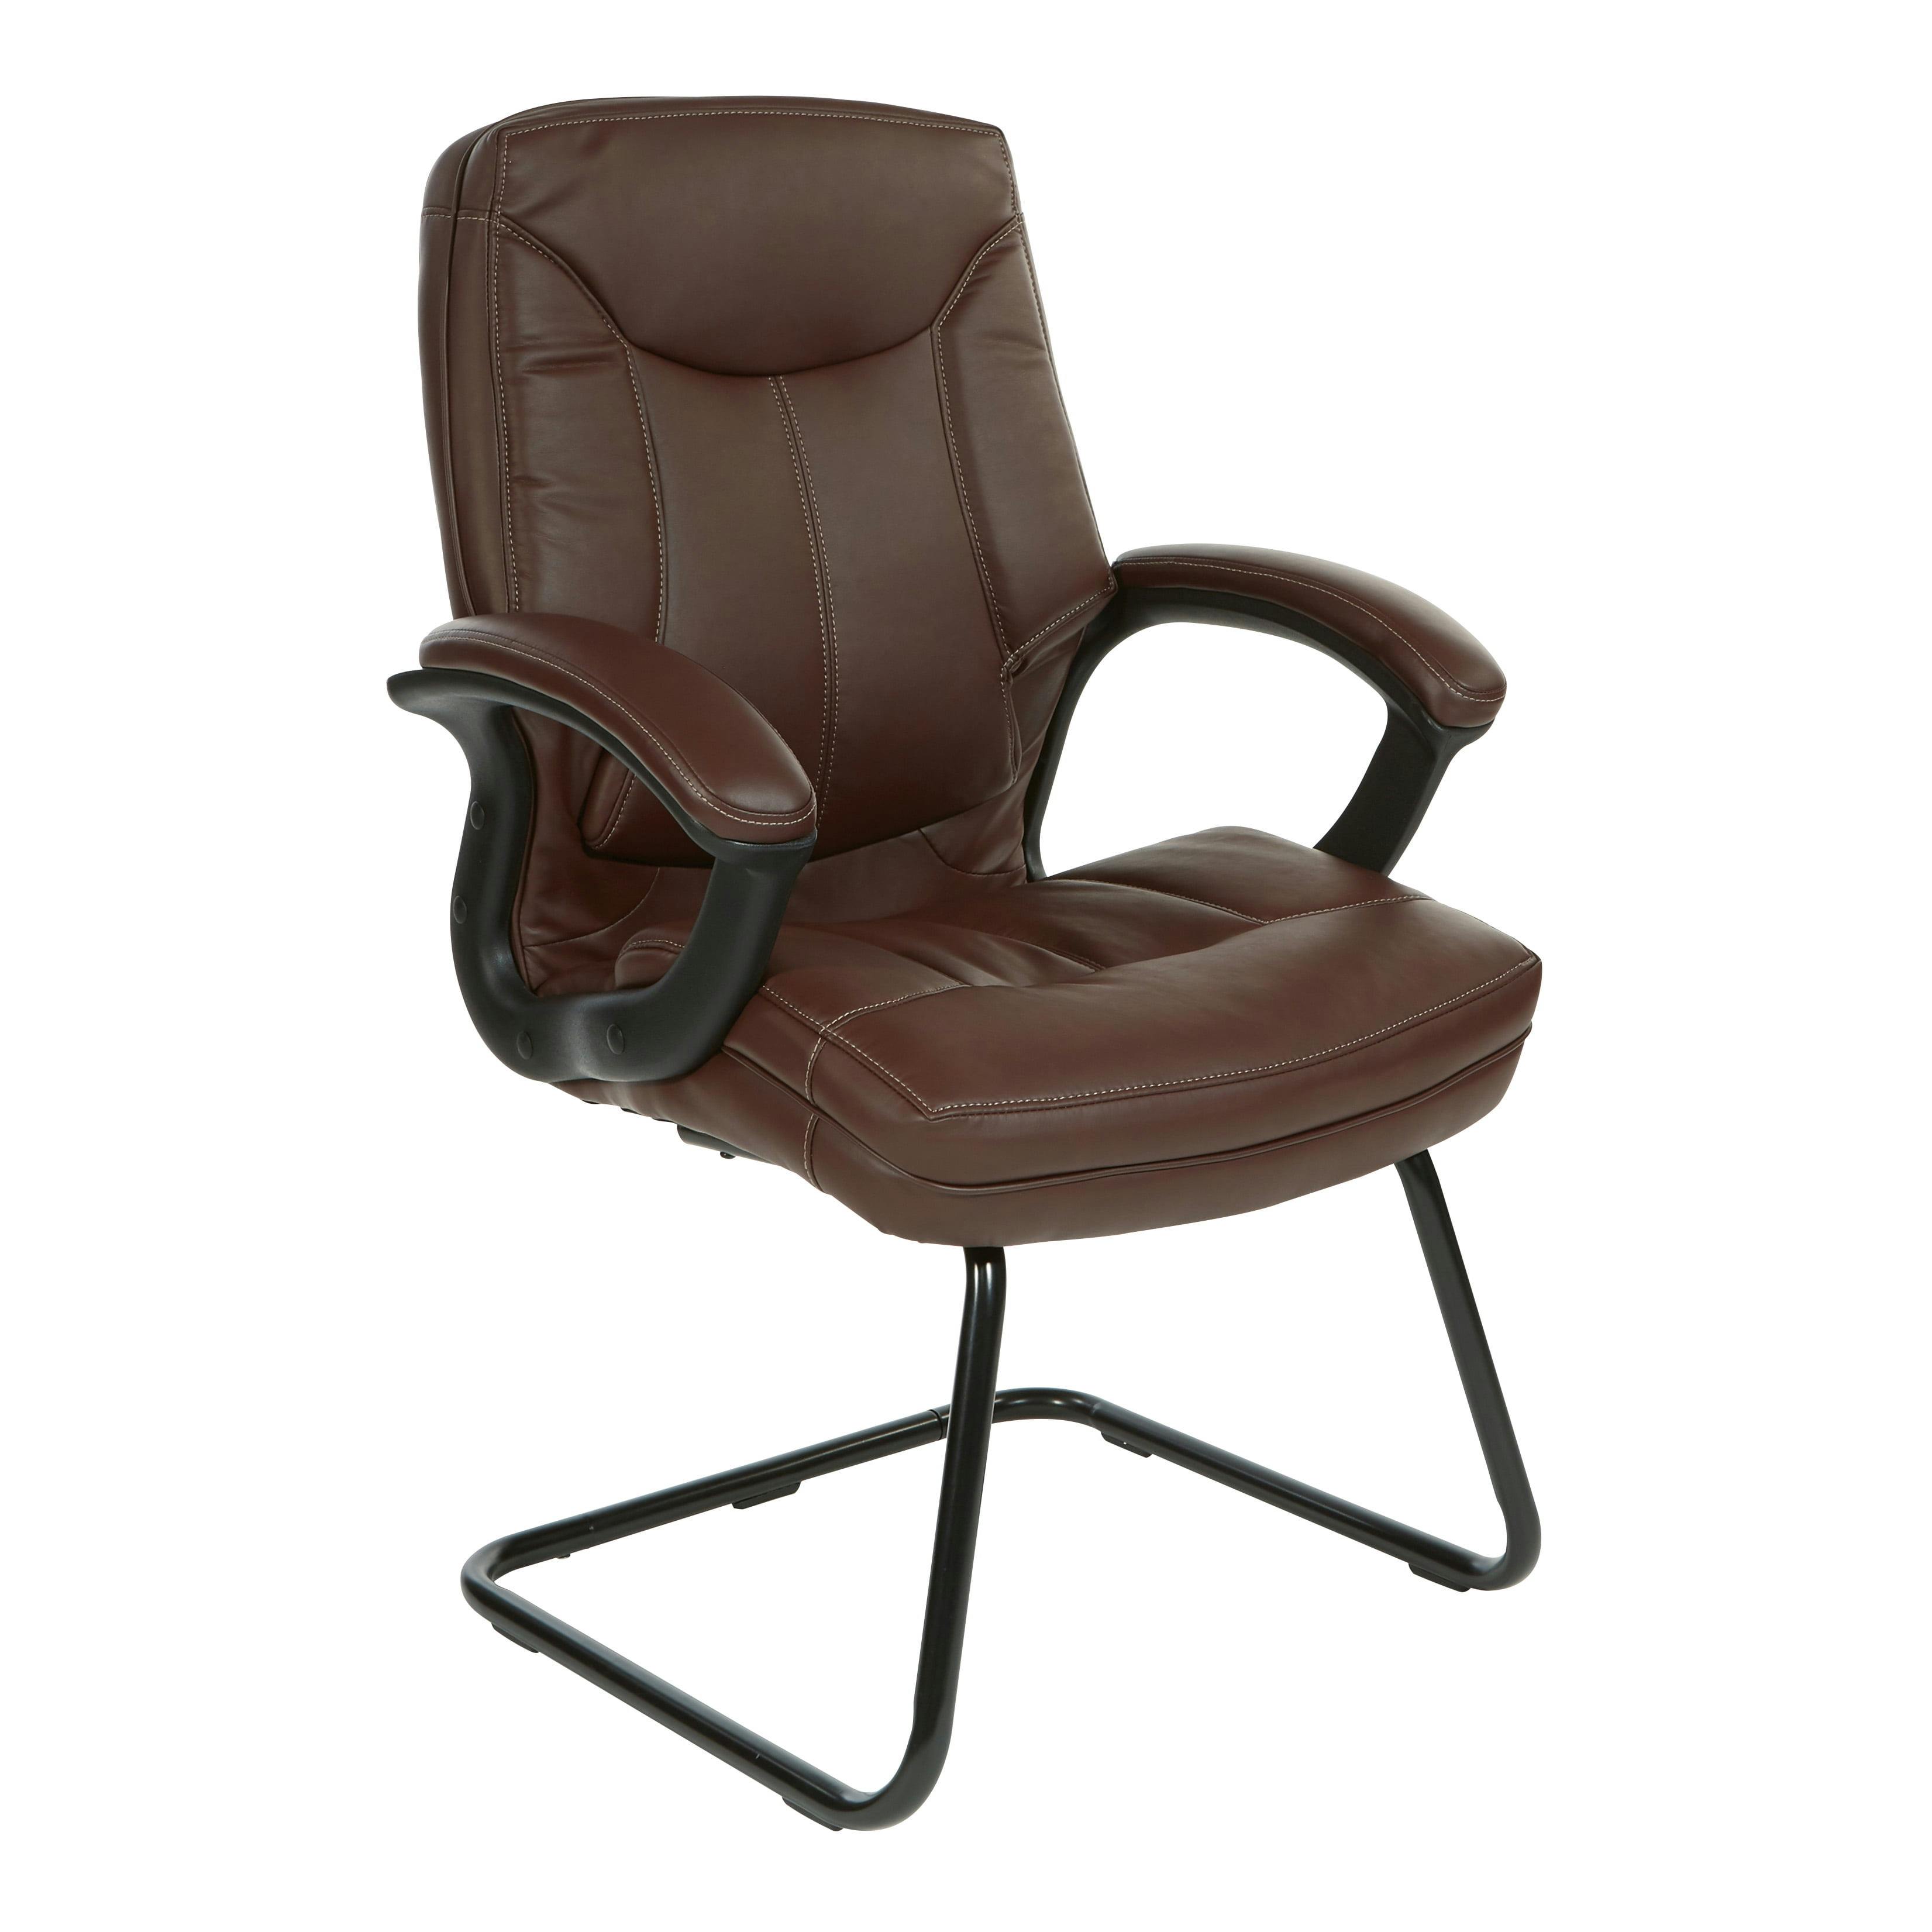 Ergonomic Chocolate Faux Leather Swivel Office Chair with Metal Finish